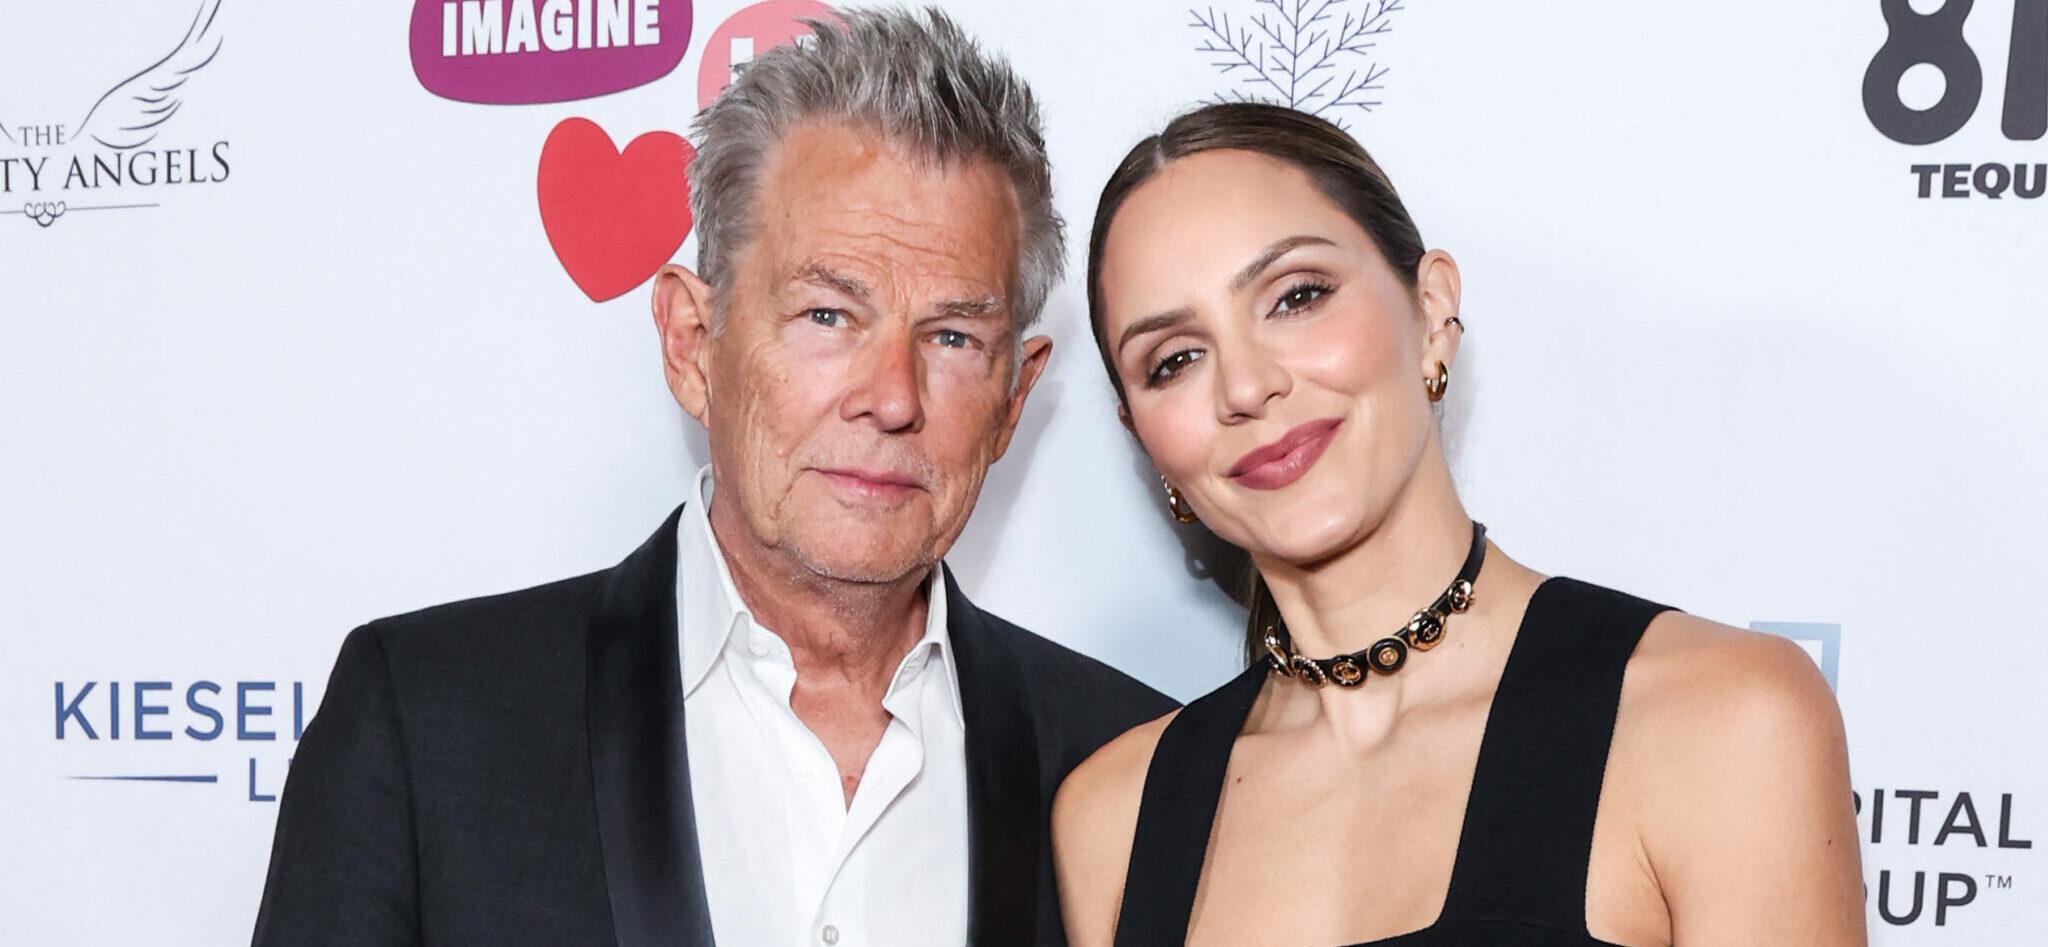 David Foster Breaks Silence On Recent Family Tragedy